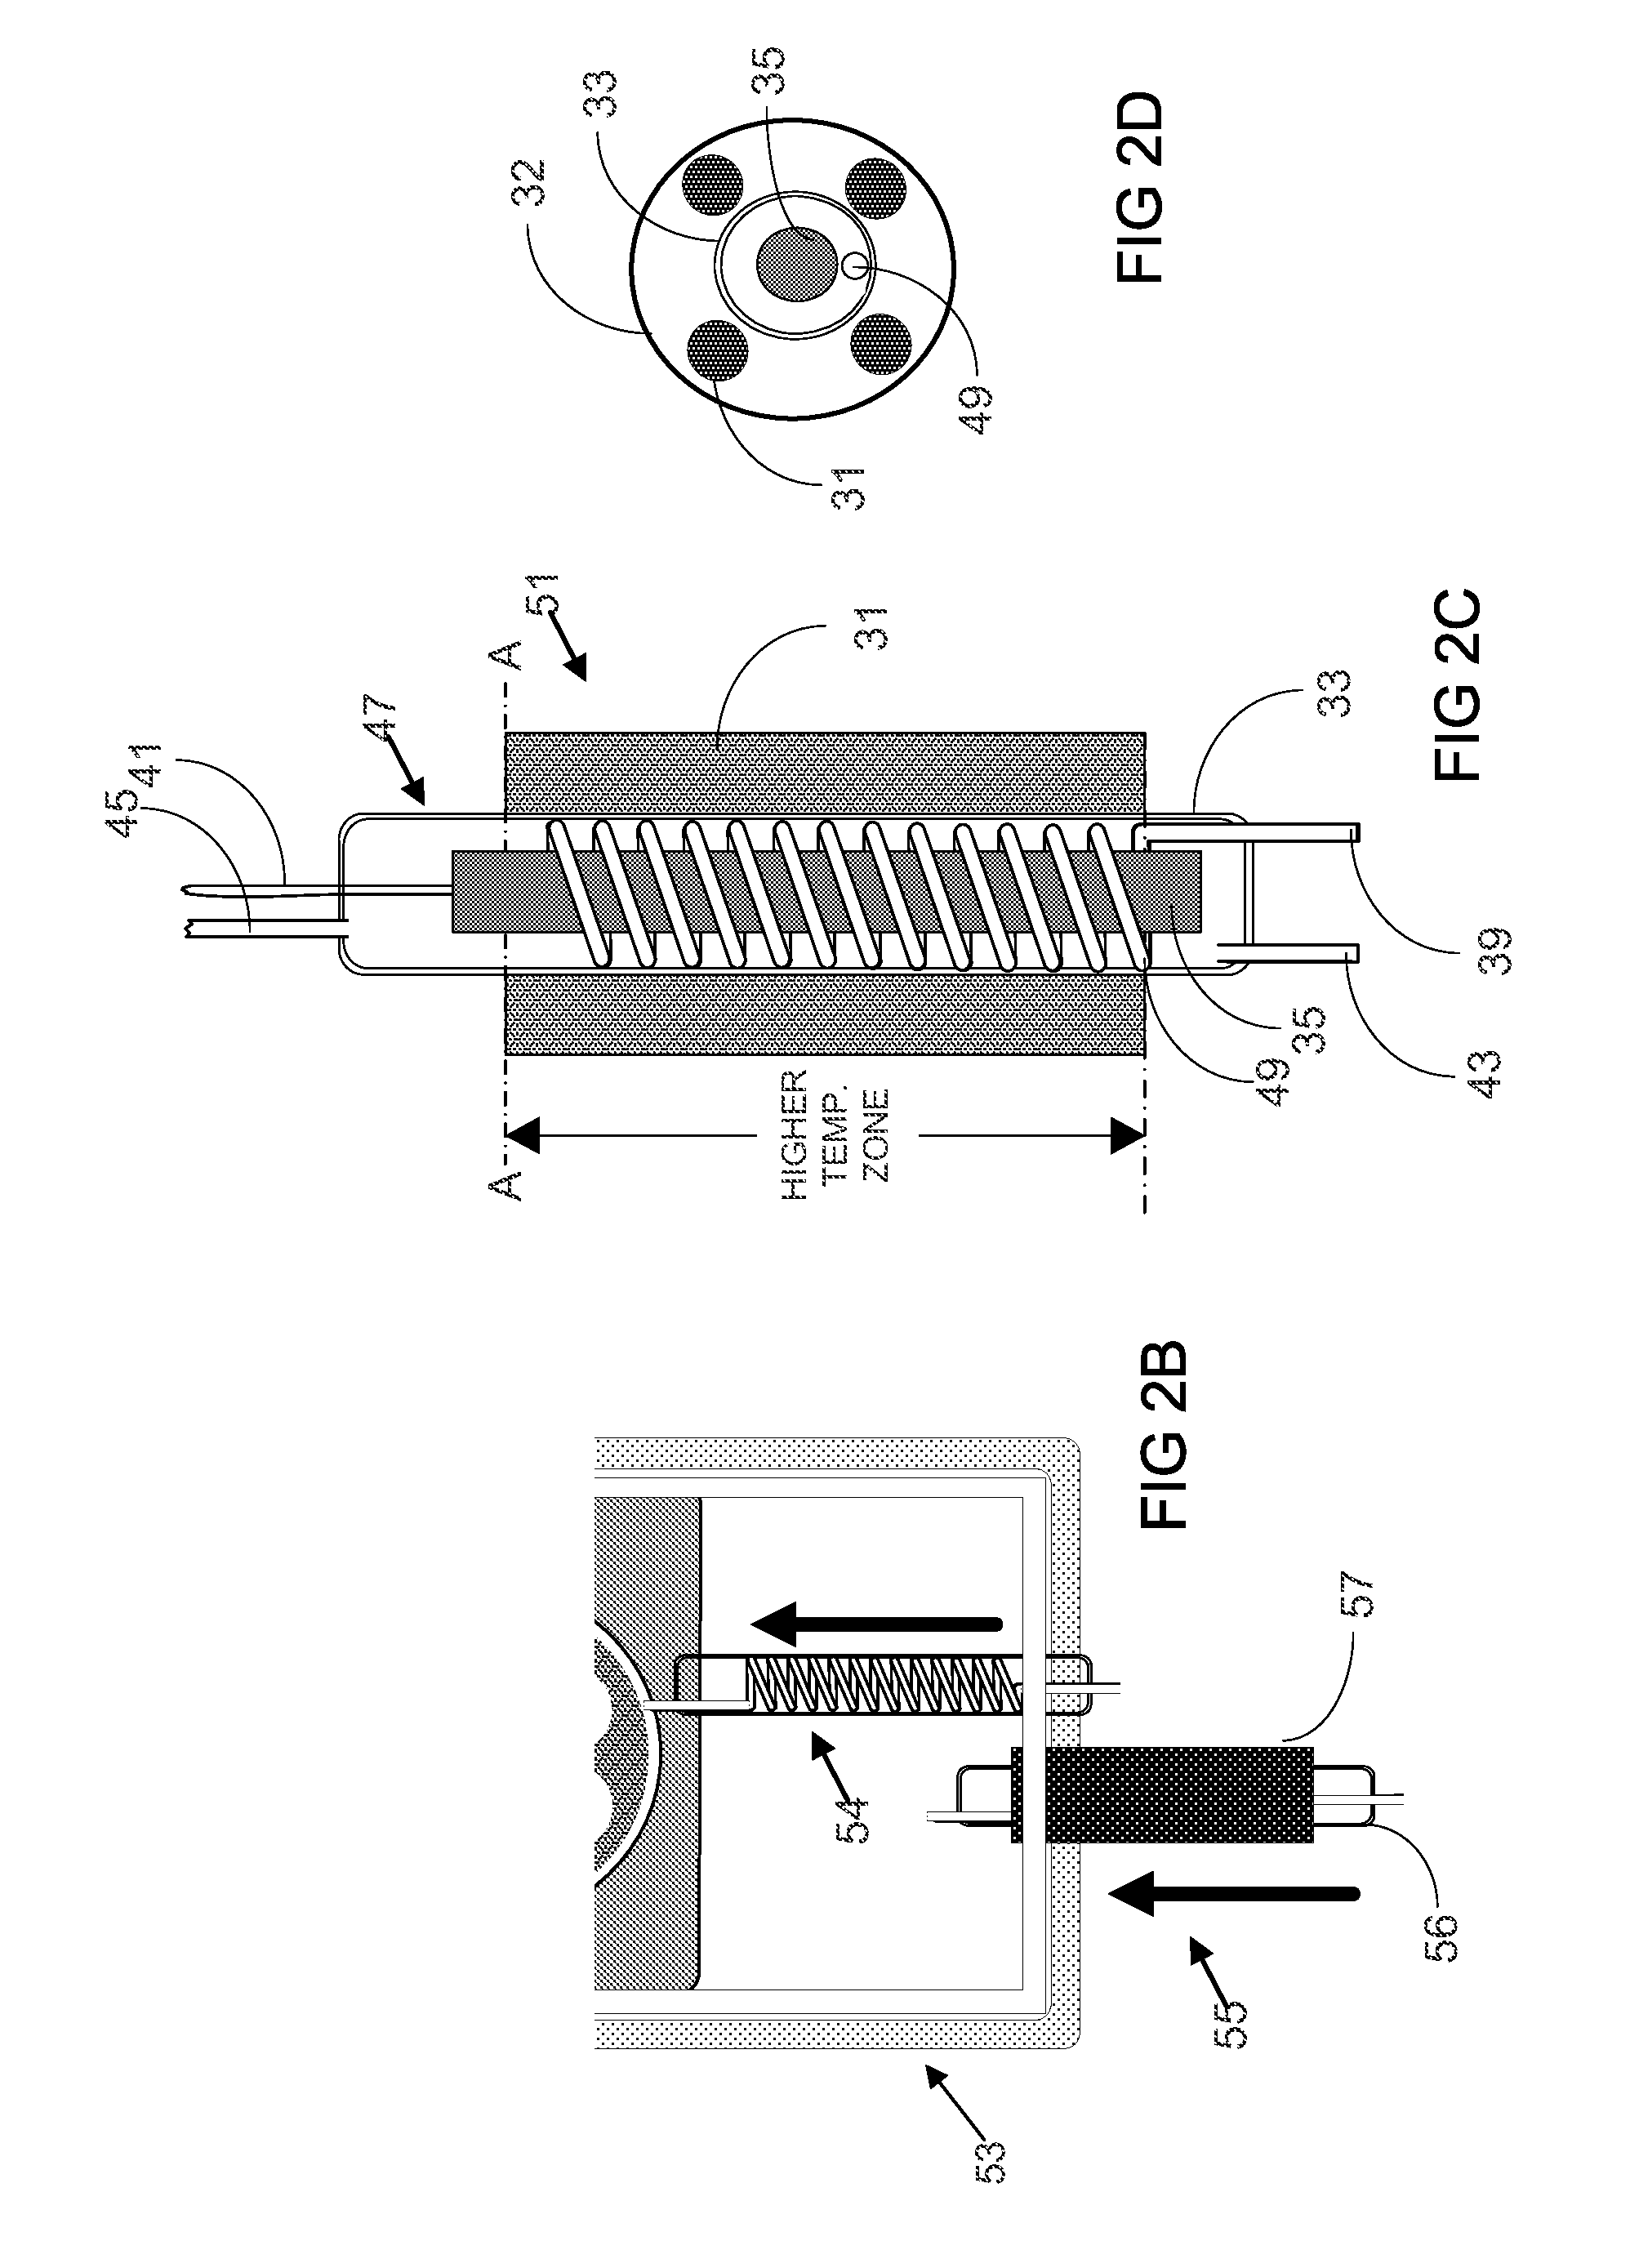 Gas injectors for CVD systems with the same